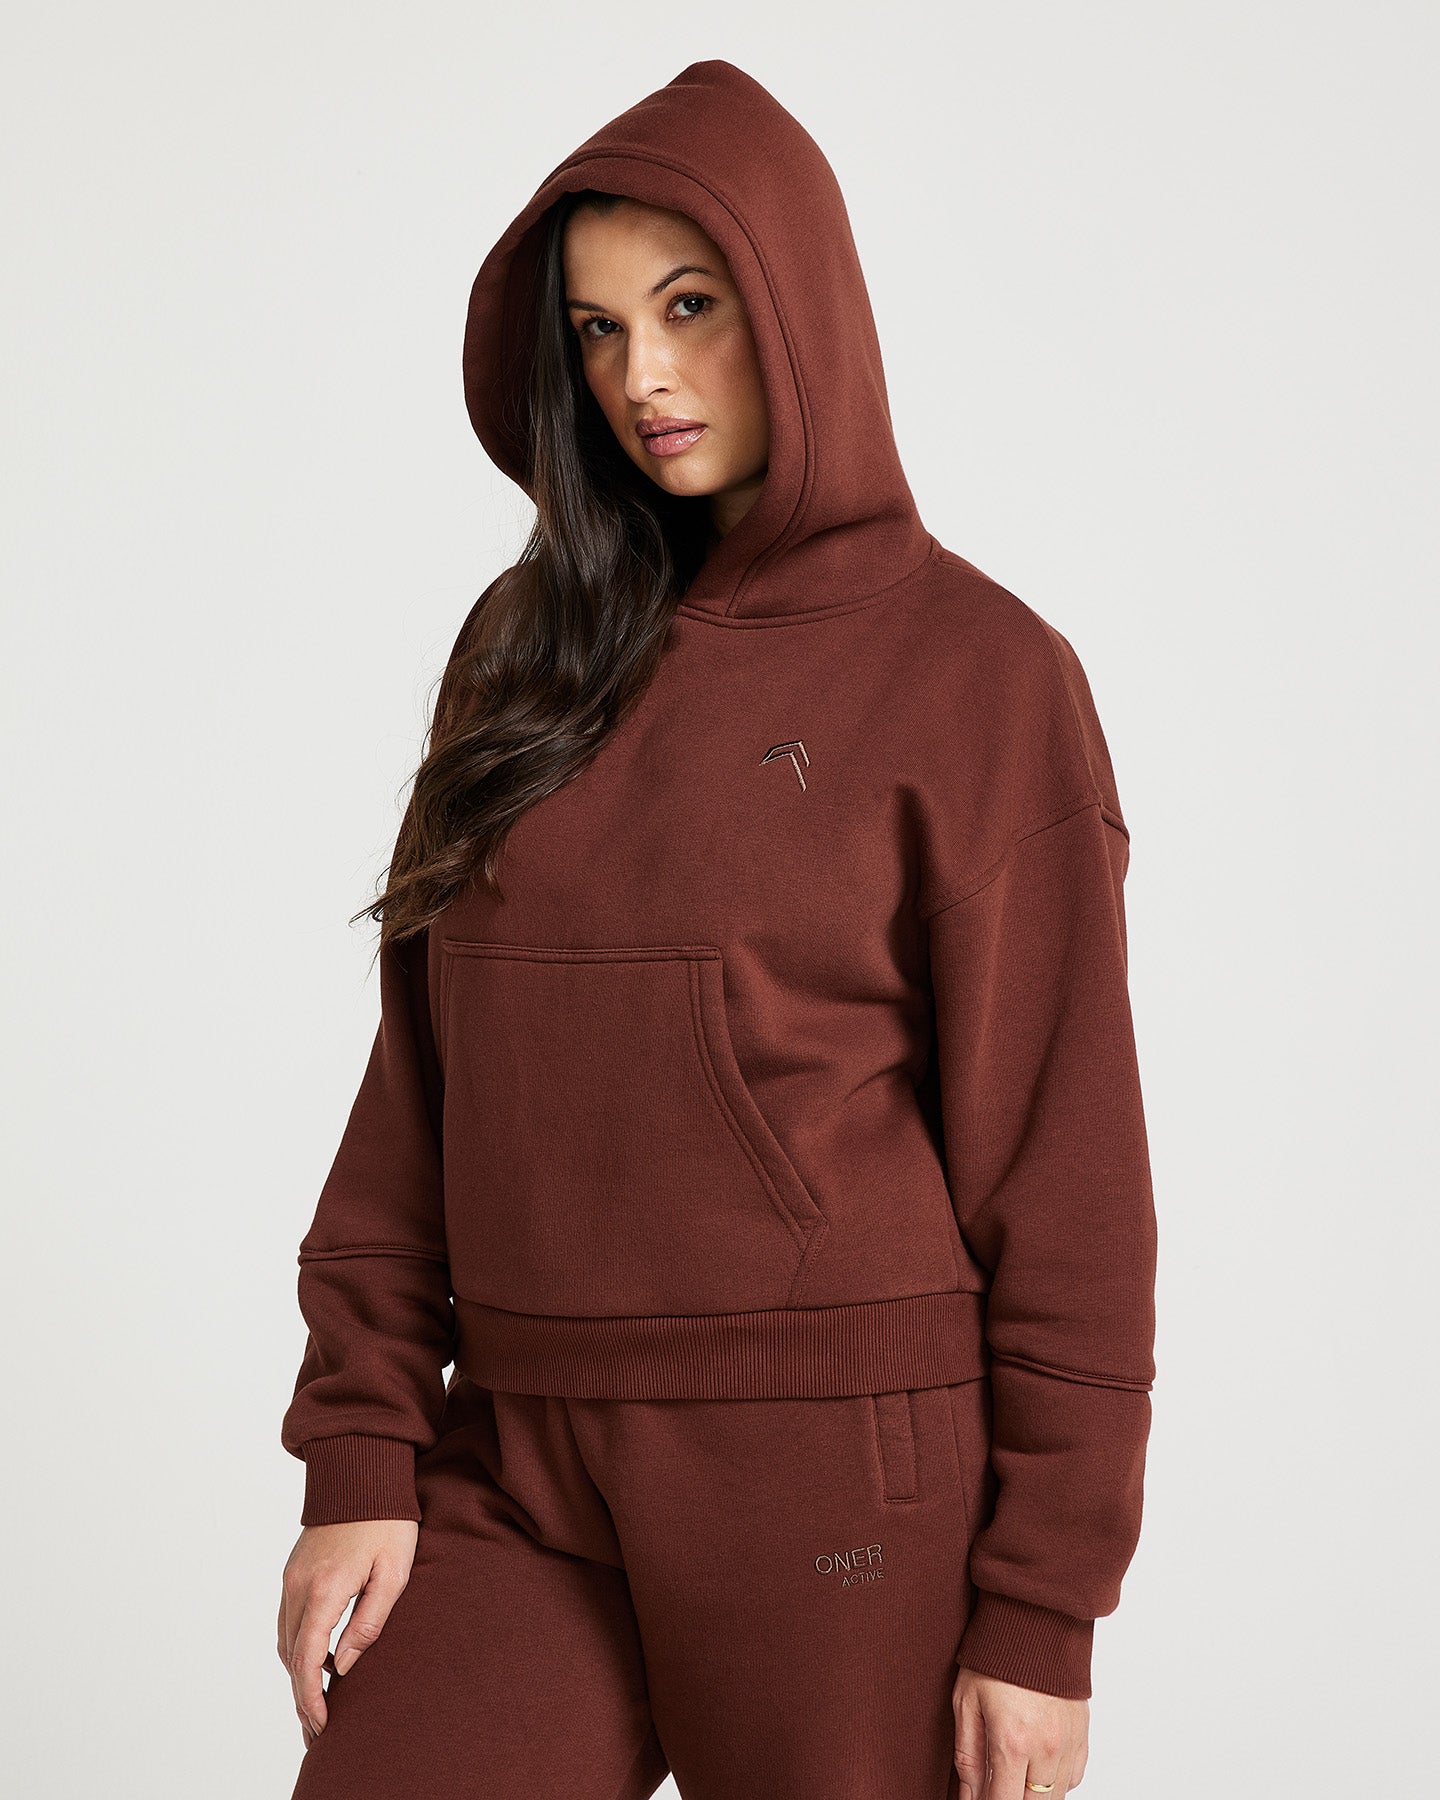 Oner | Sports US Active for WOMEN Hoodie